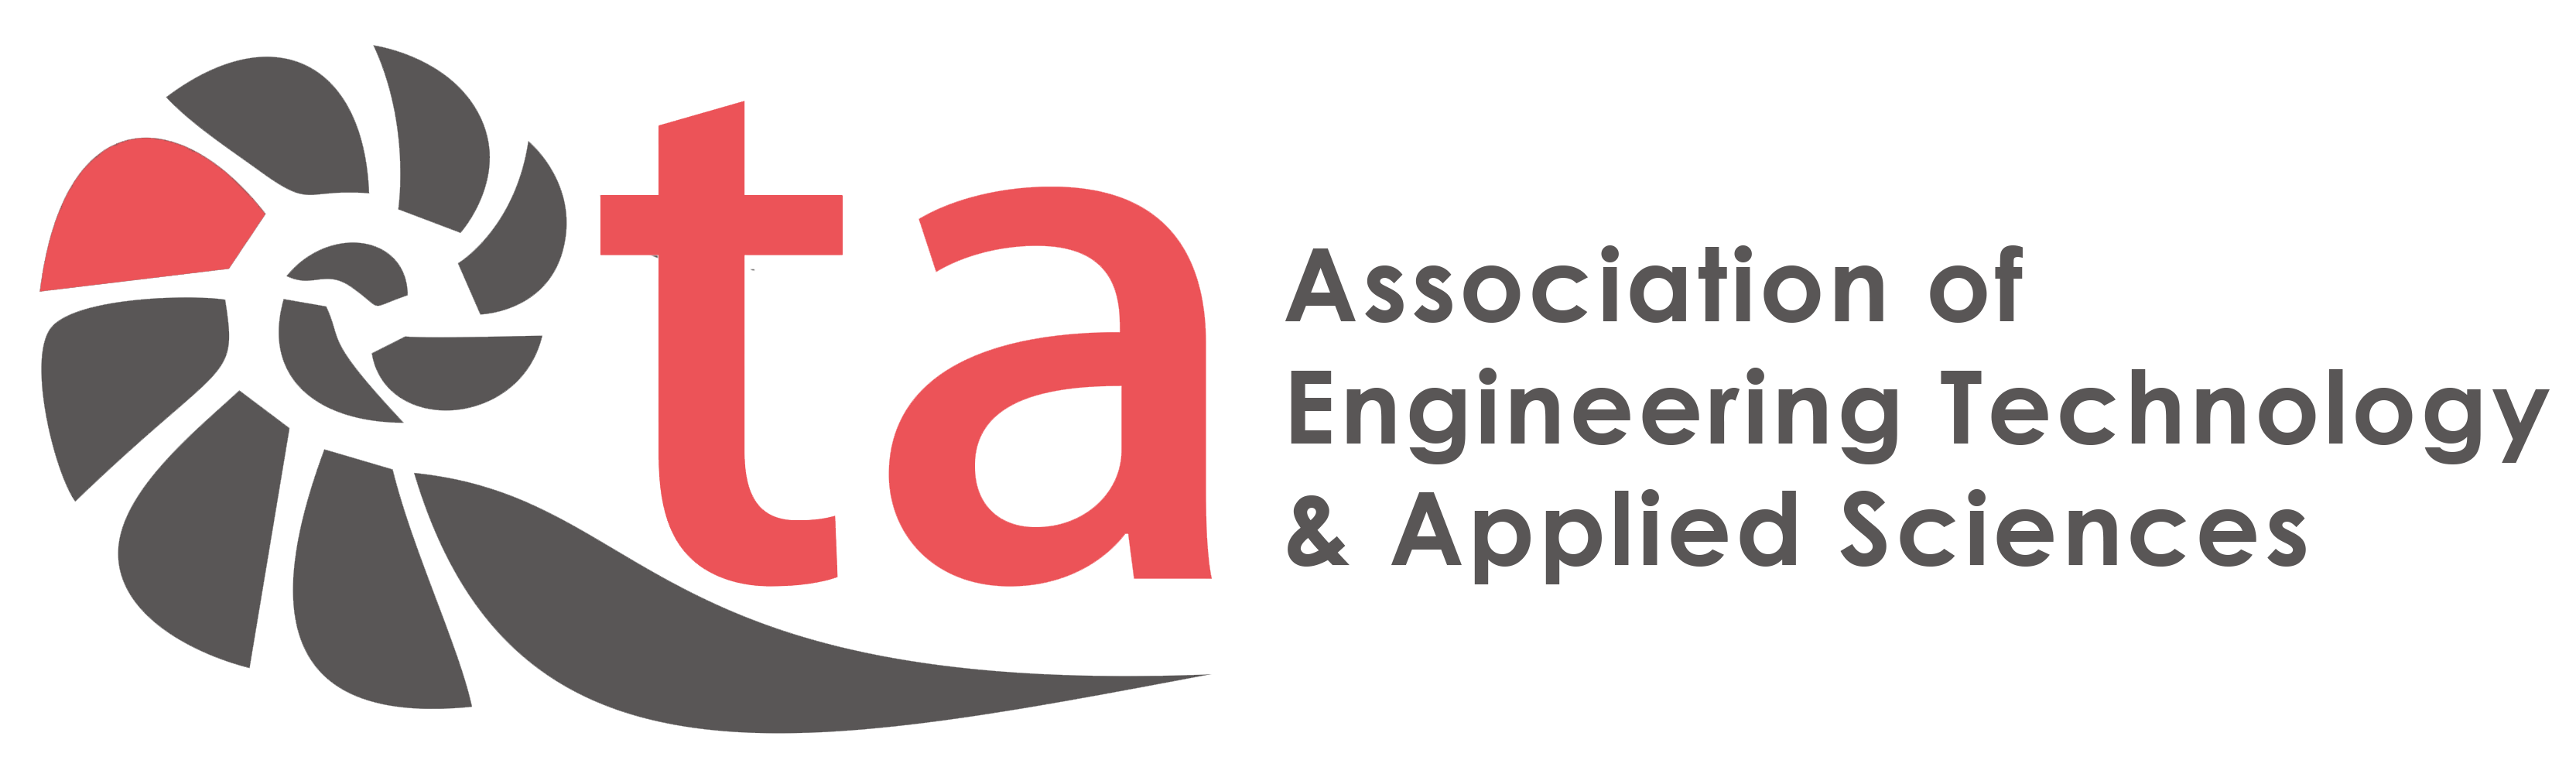 AETA International Conference on Space Environment, Aviation Technology, Applied Sciences, Engineering & Information Technology  (SAEIT)